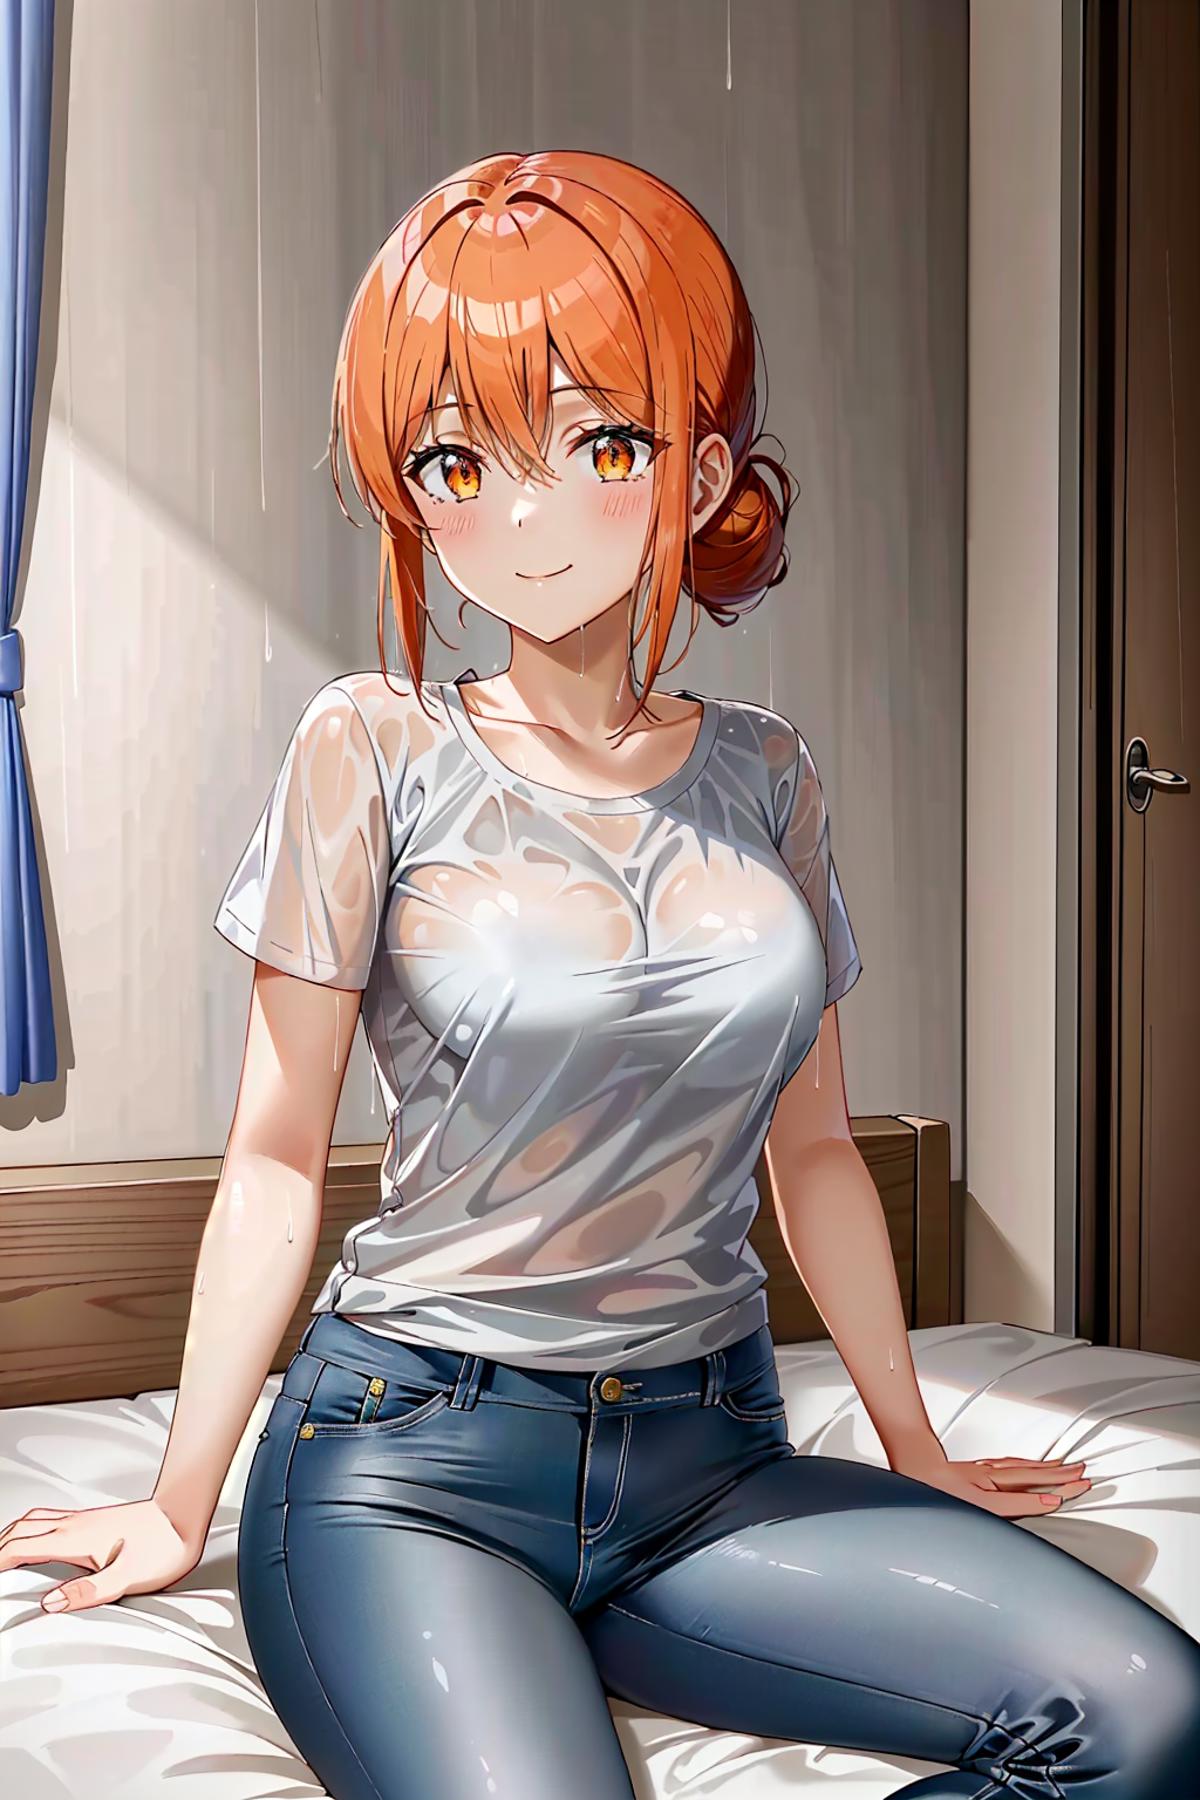 Mrs. Yuigahama 由比ヶ浜夫人 | My Teen Romantic Comedy is Wrong as I Expected ~ Oregairu image by Vegetable33